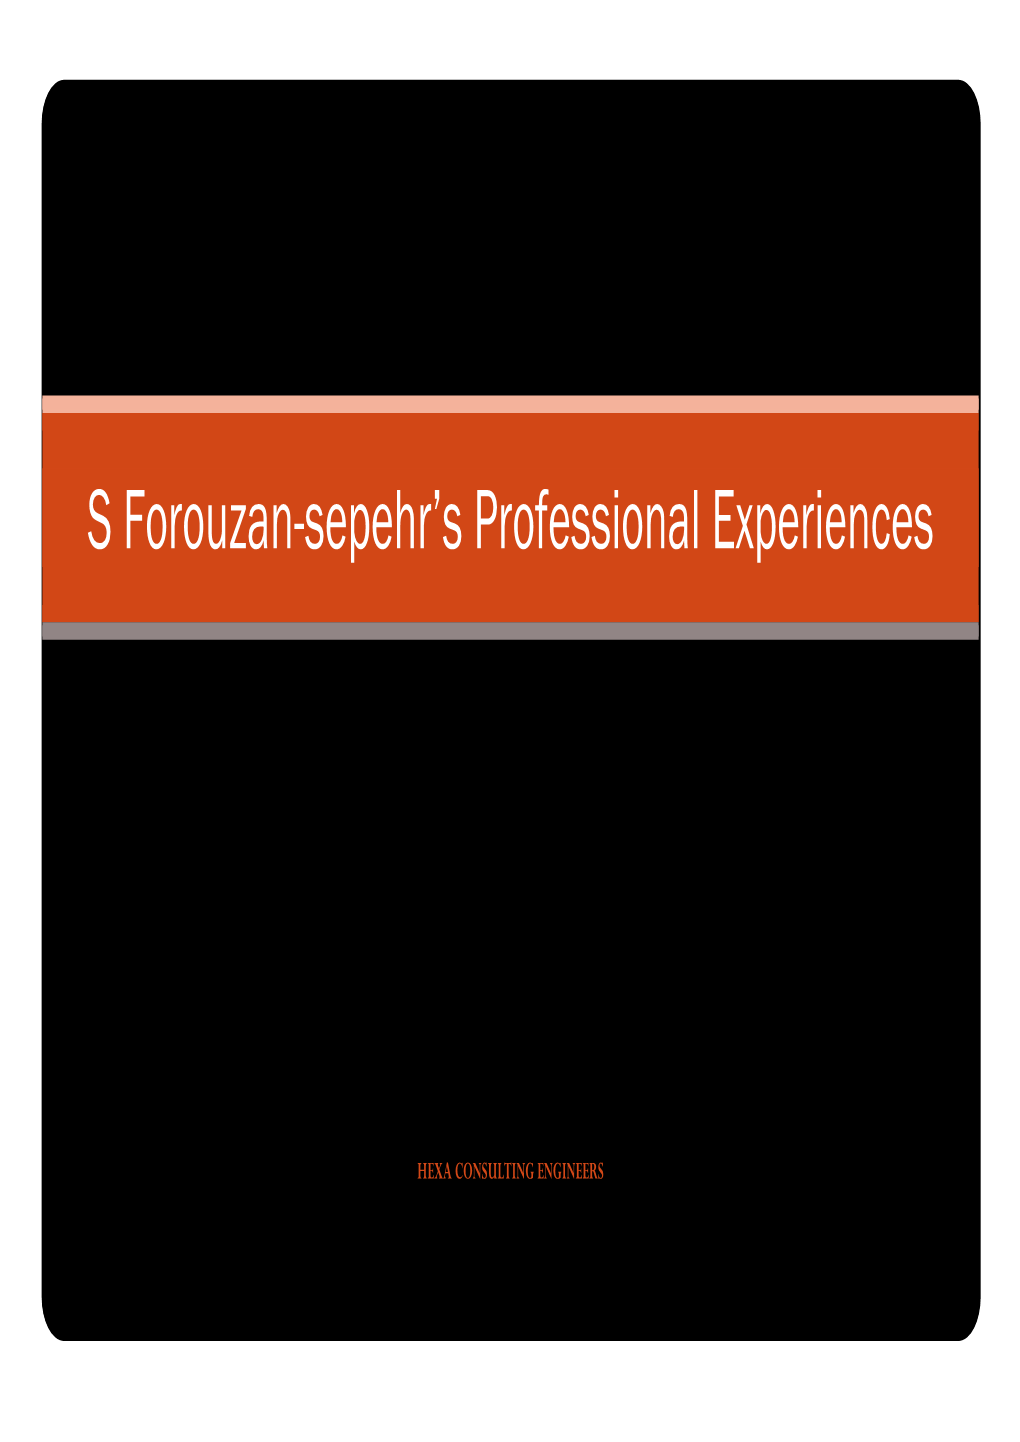 S Forouzan-Sepehr's Professional Experiences